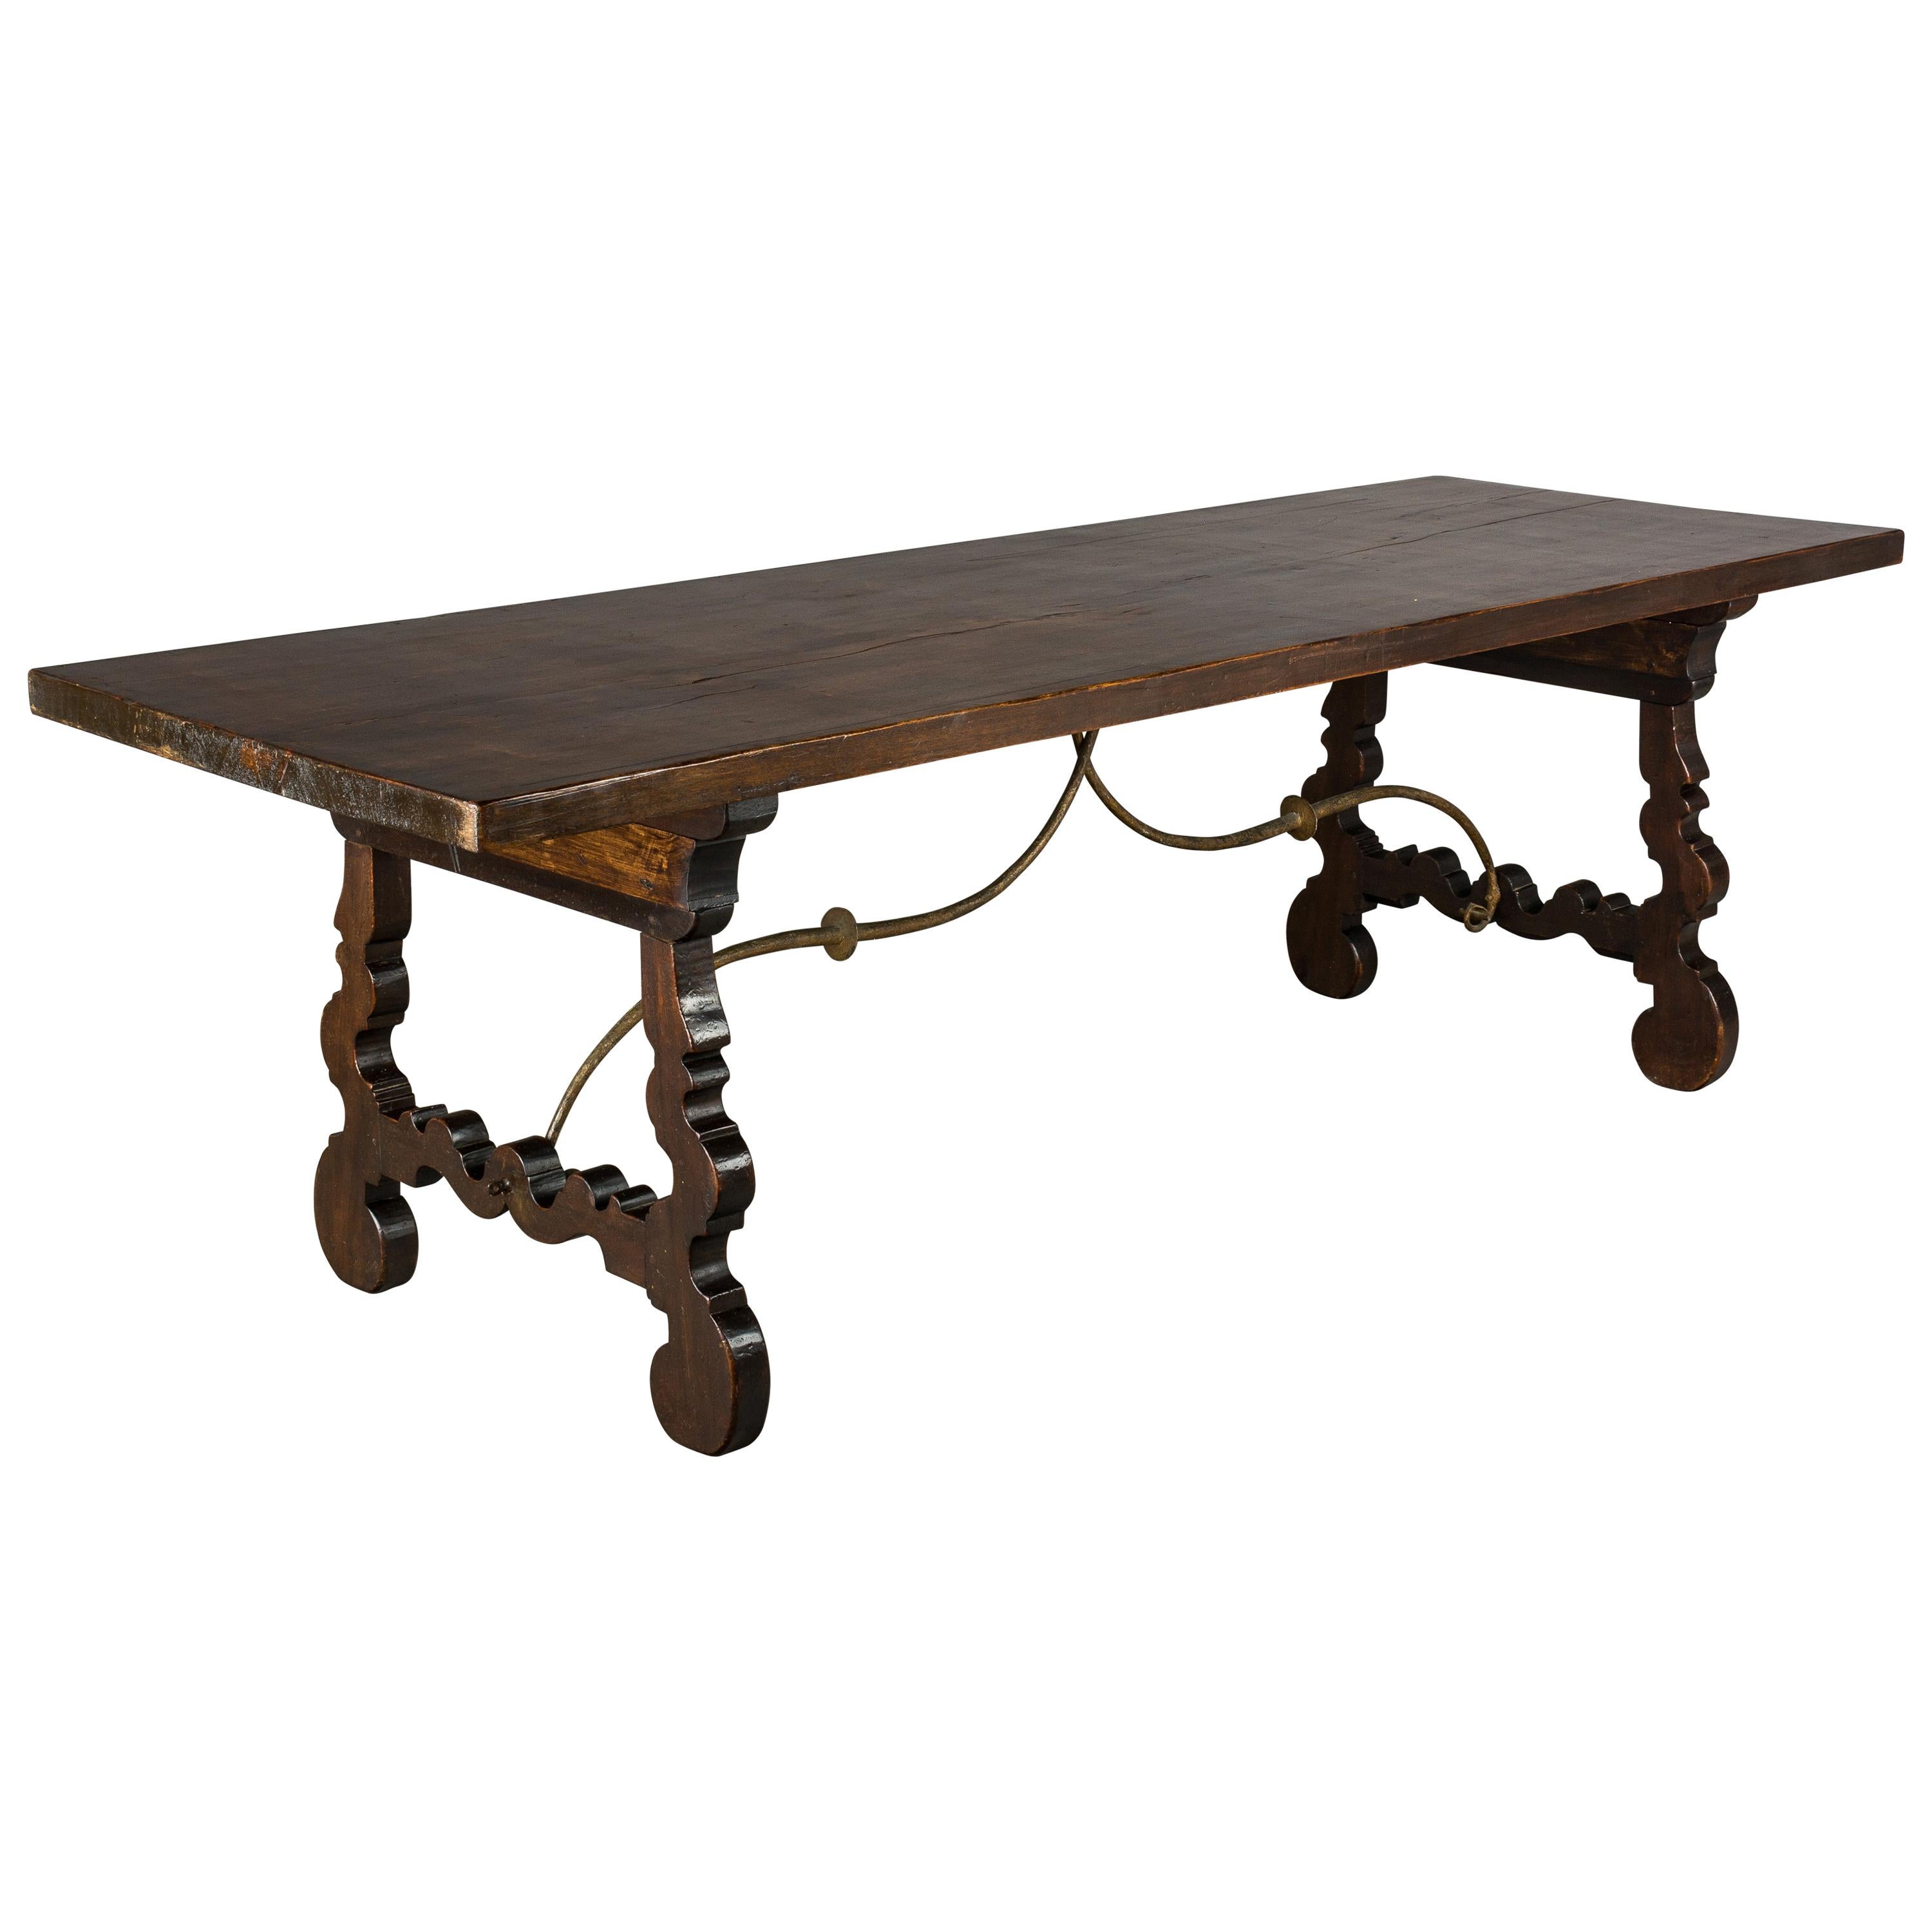 Spanish Baroque Style Refectory Table